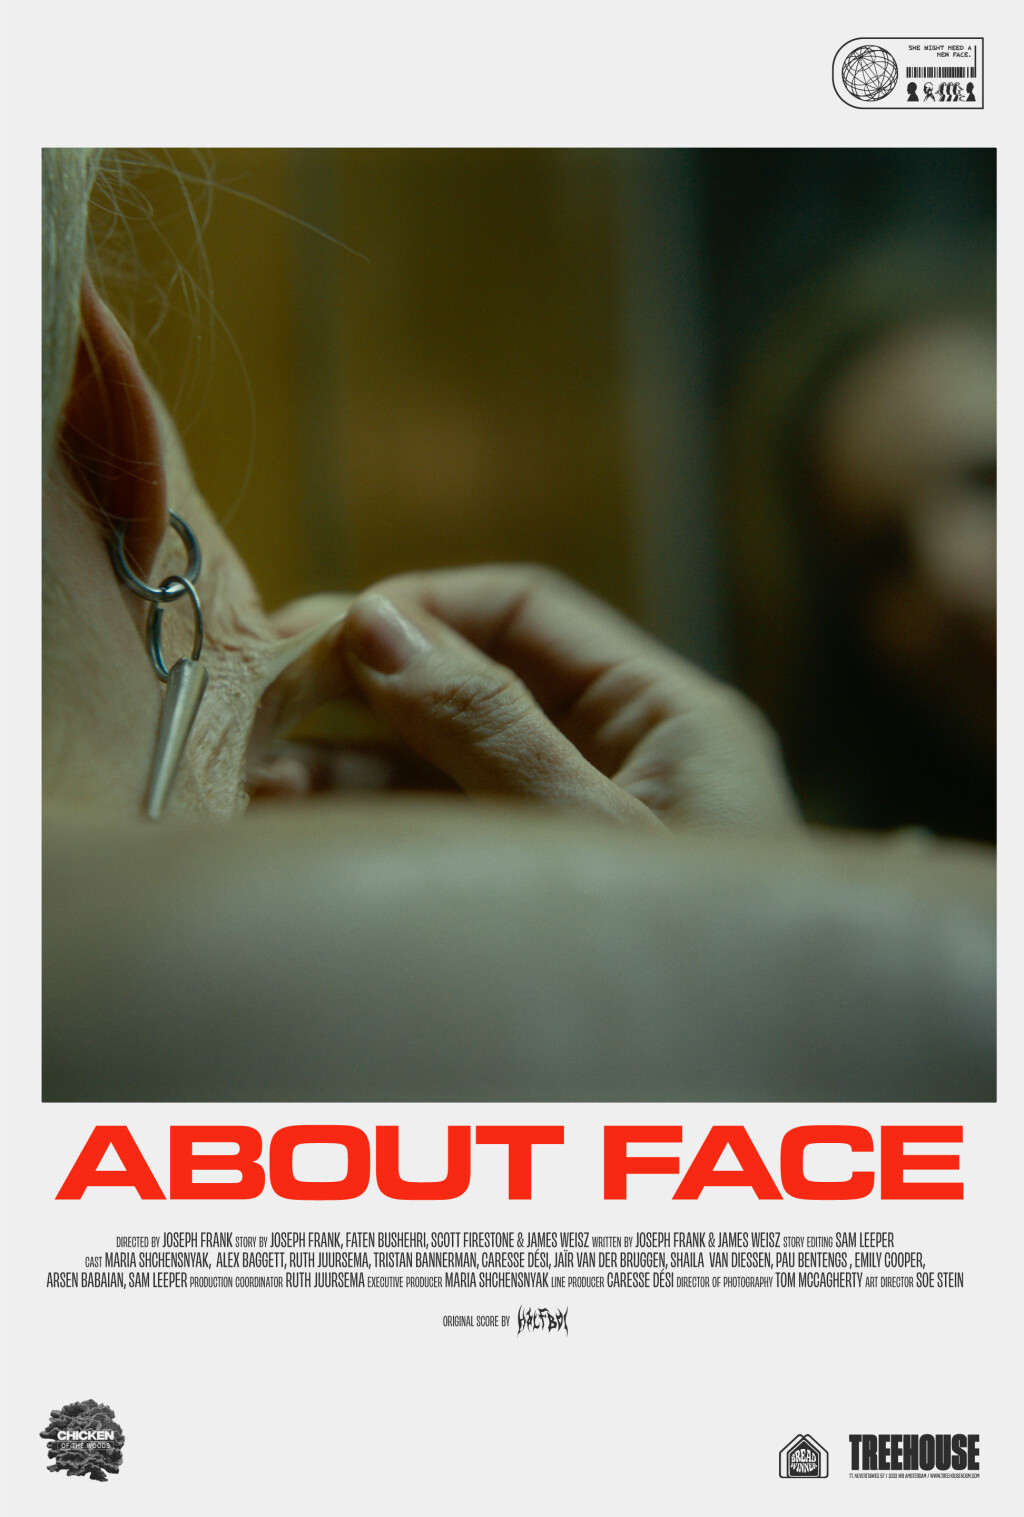 Filmposter for ABOUT FACE